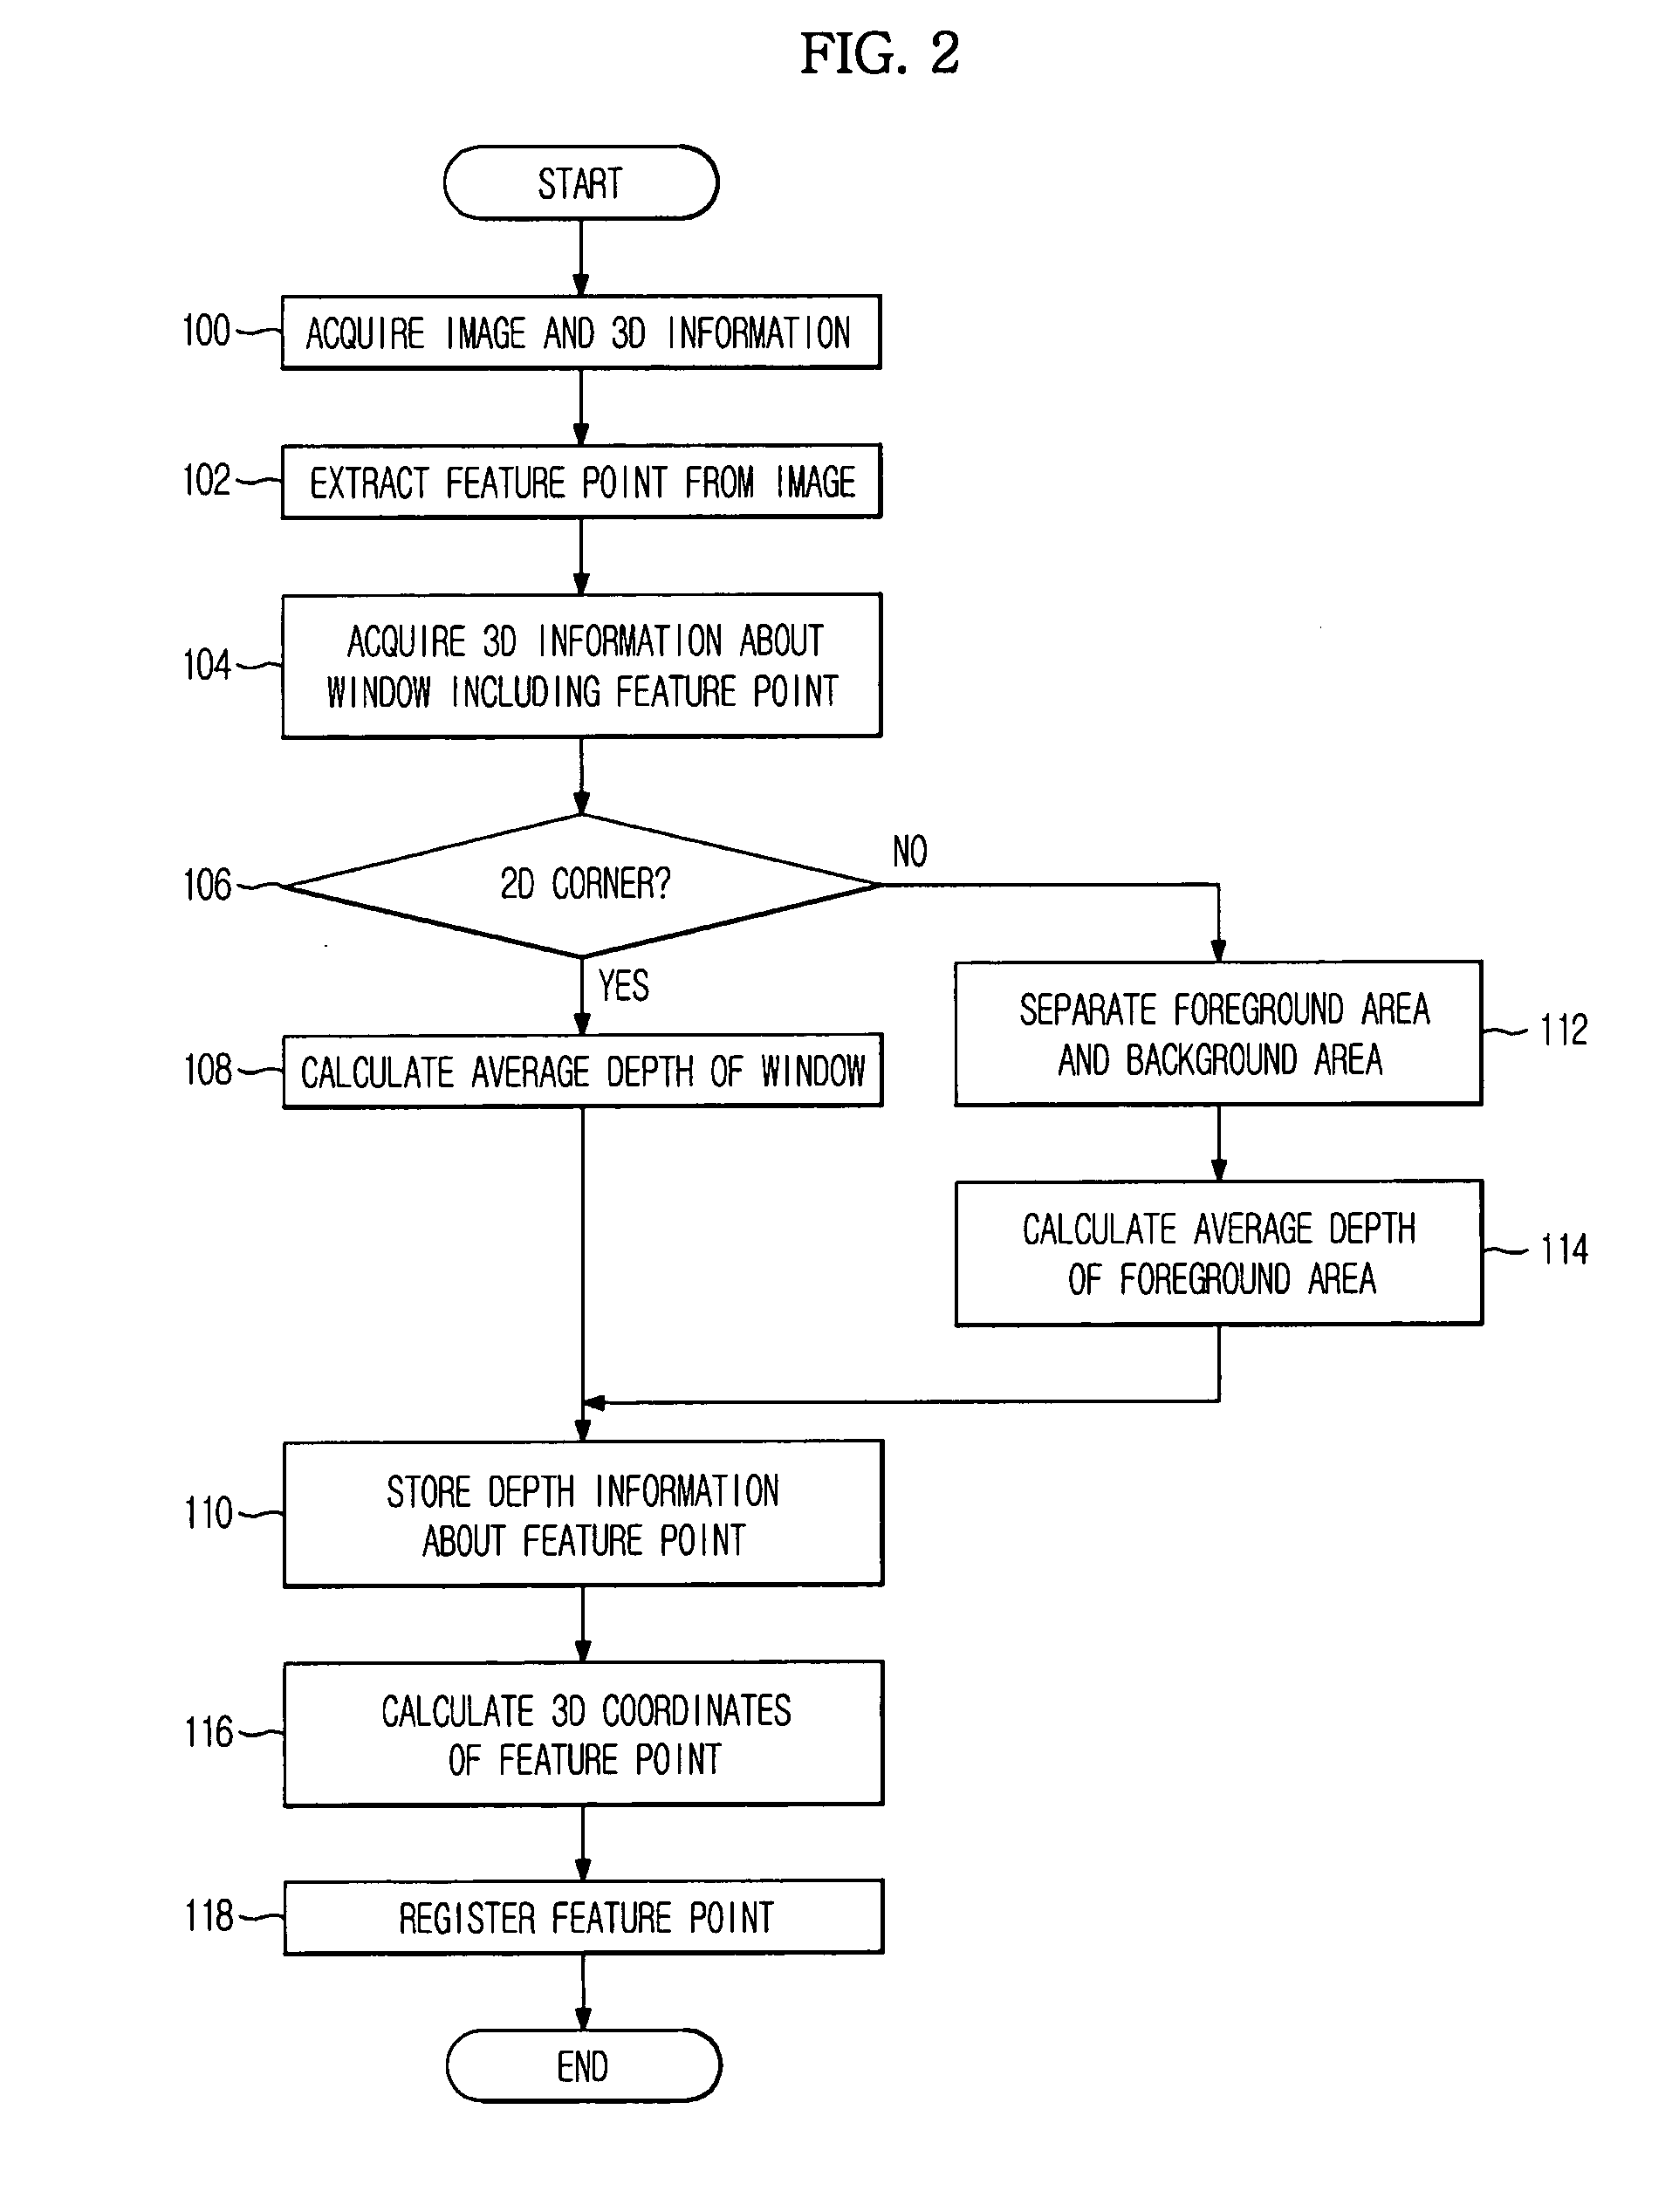 Image-based localization feature point registration apparatus, method and computer-readable medium